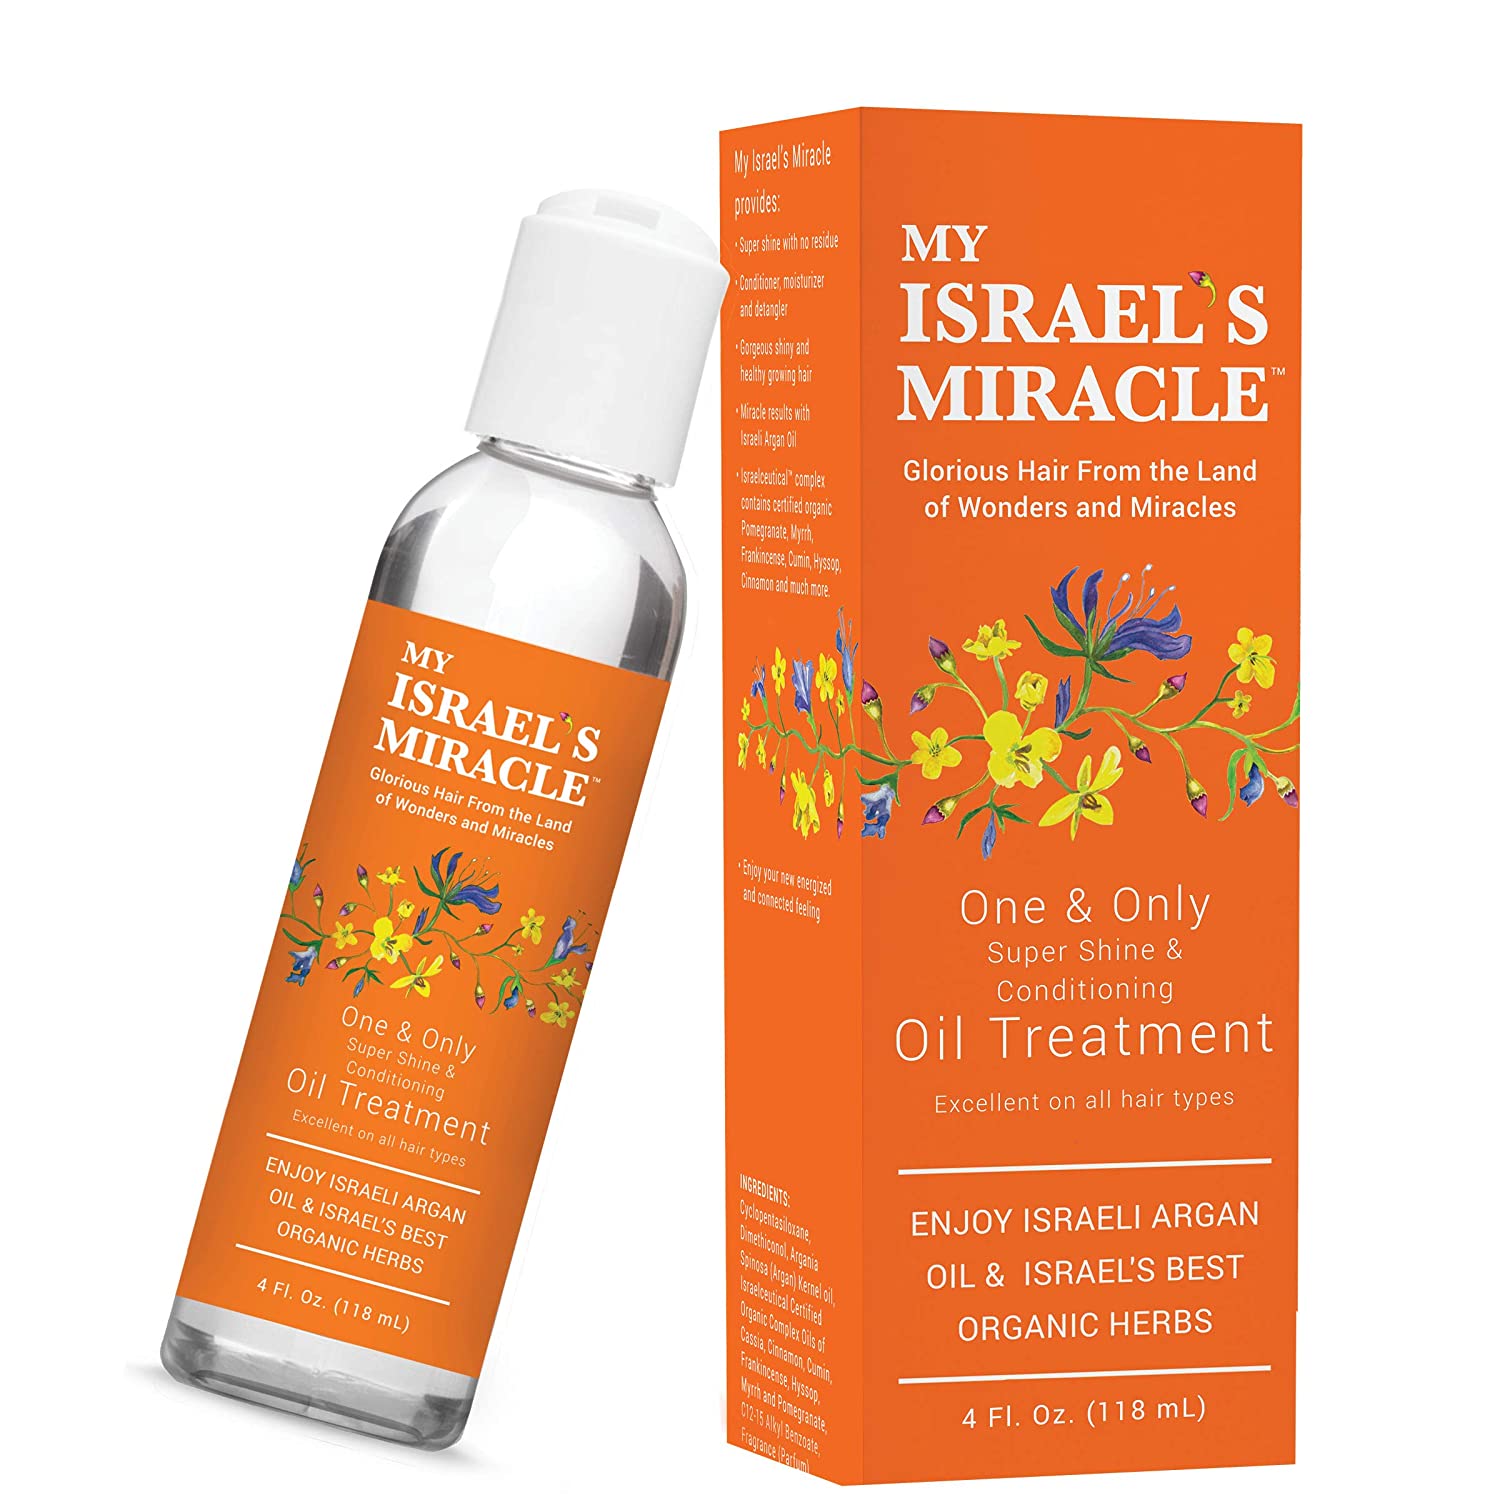 My Israel's Miracle One & Only Oil Treatment